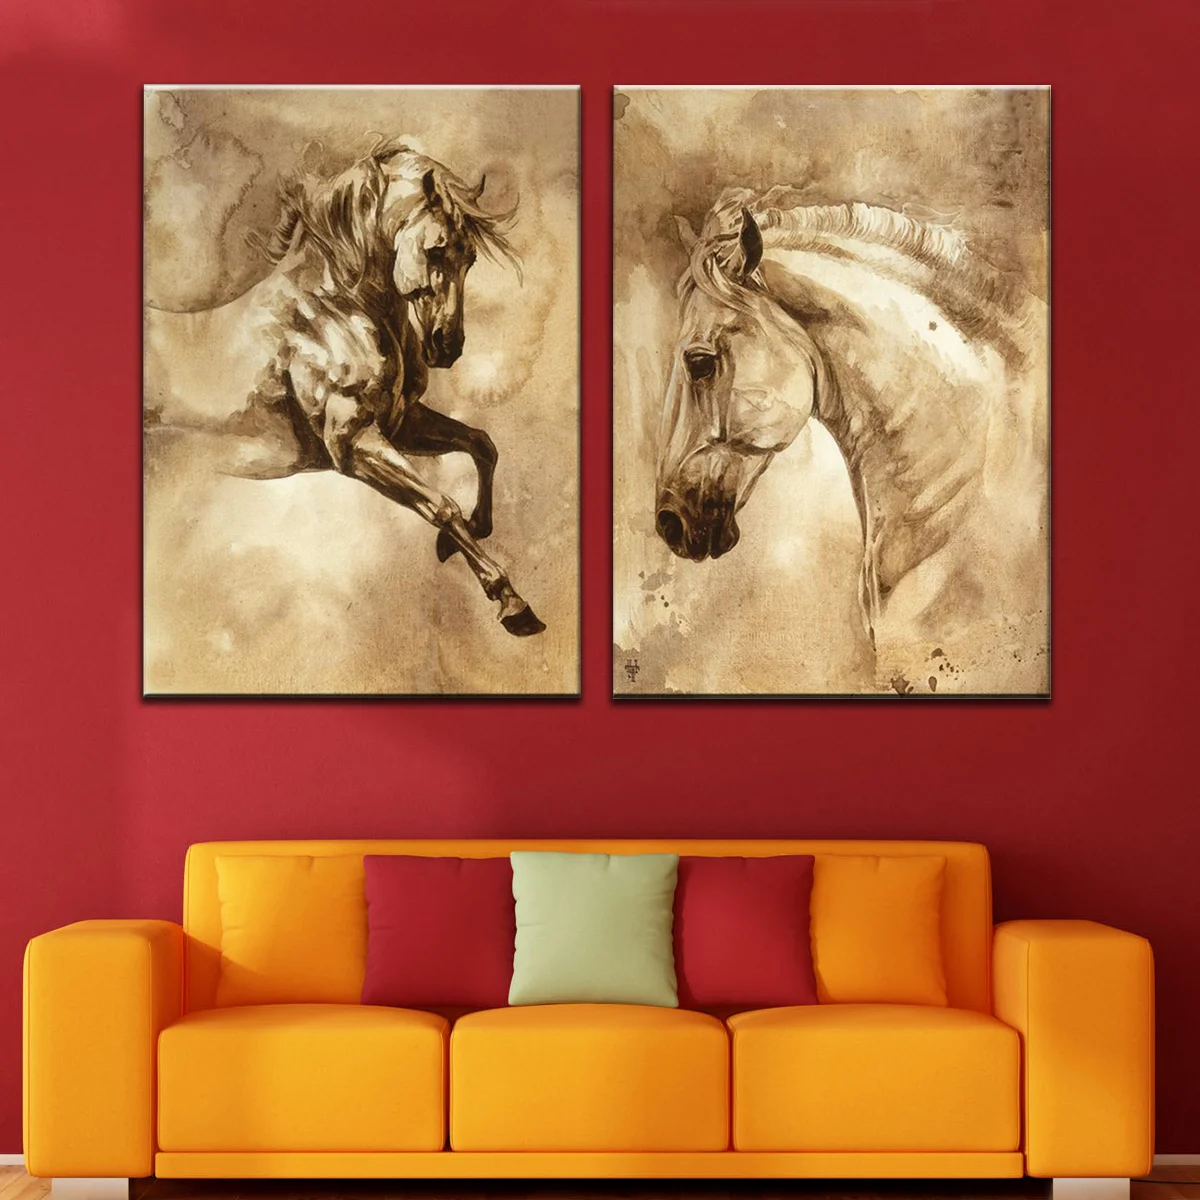 

Unframed Two Panels on Canvas Wall Modern Oil Paintings Decorative Abstract Horse Pictures for Home Living Room Bedroom